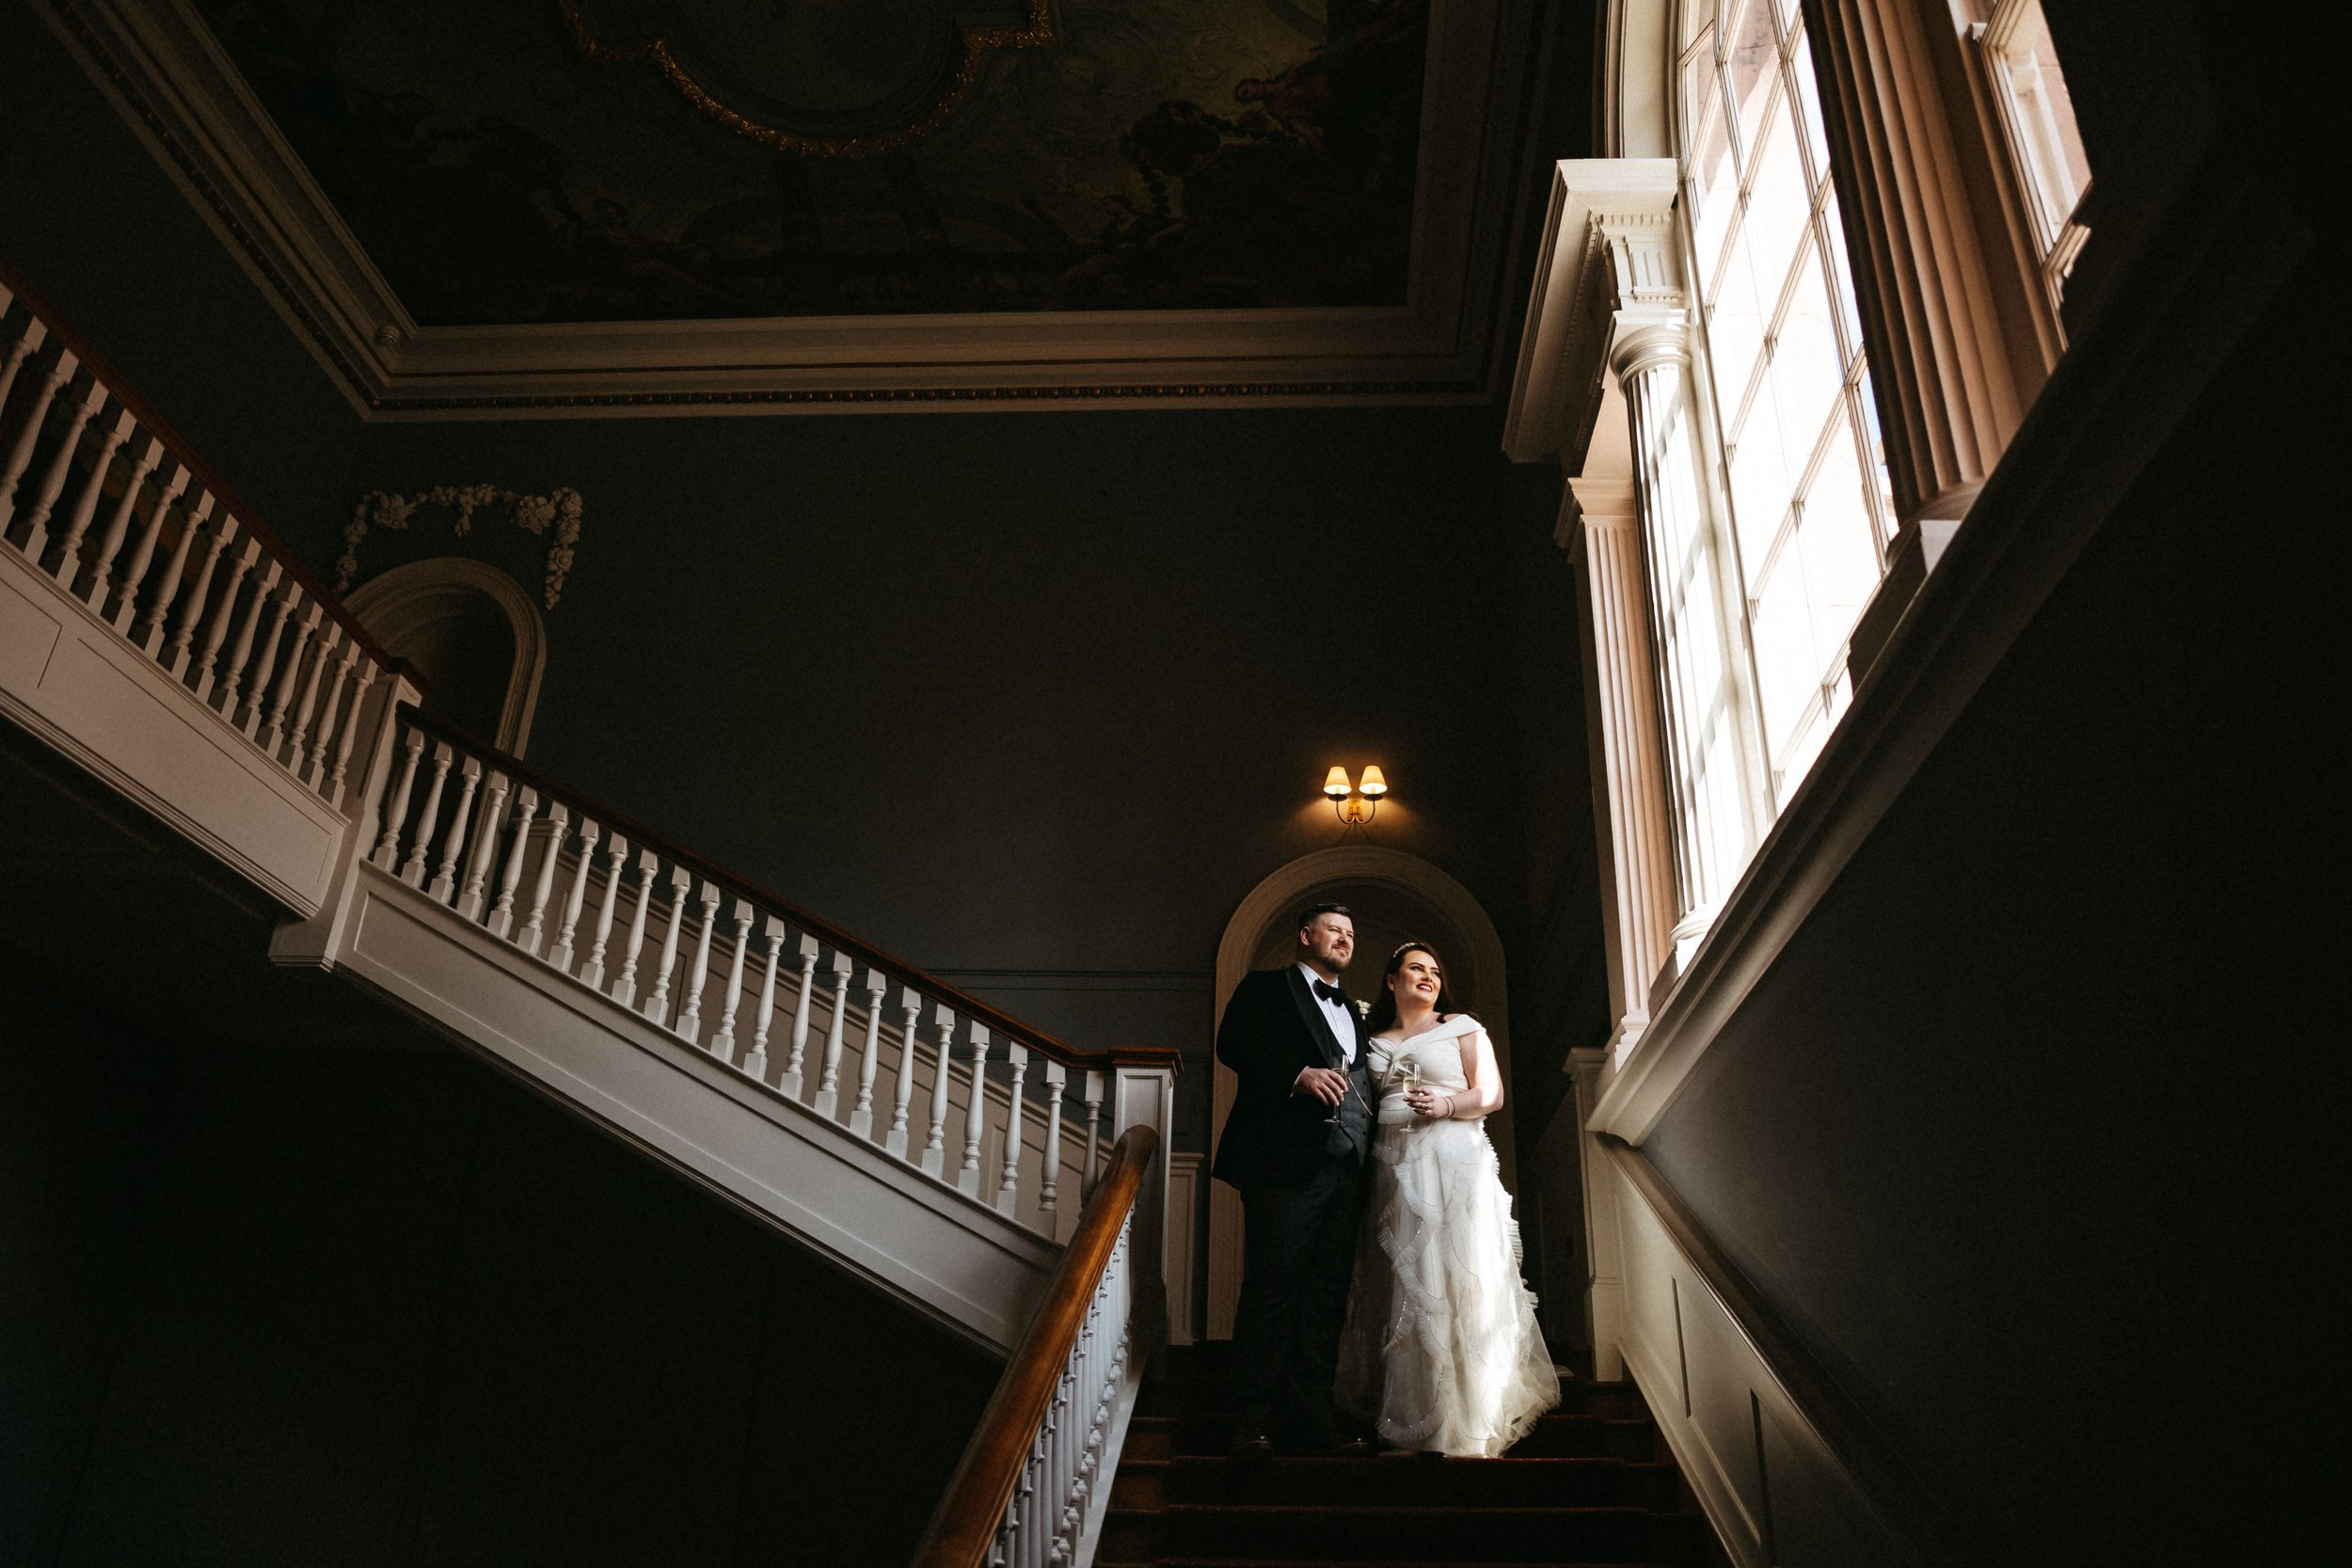 Beautiful bride Claire wore a wedding dress by Halfpenny London